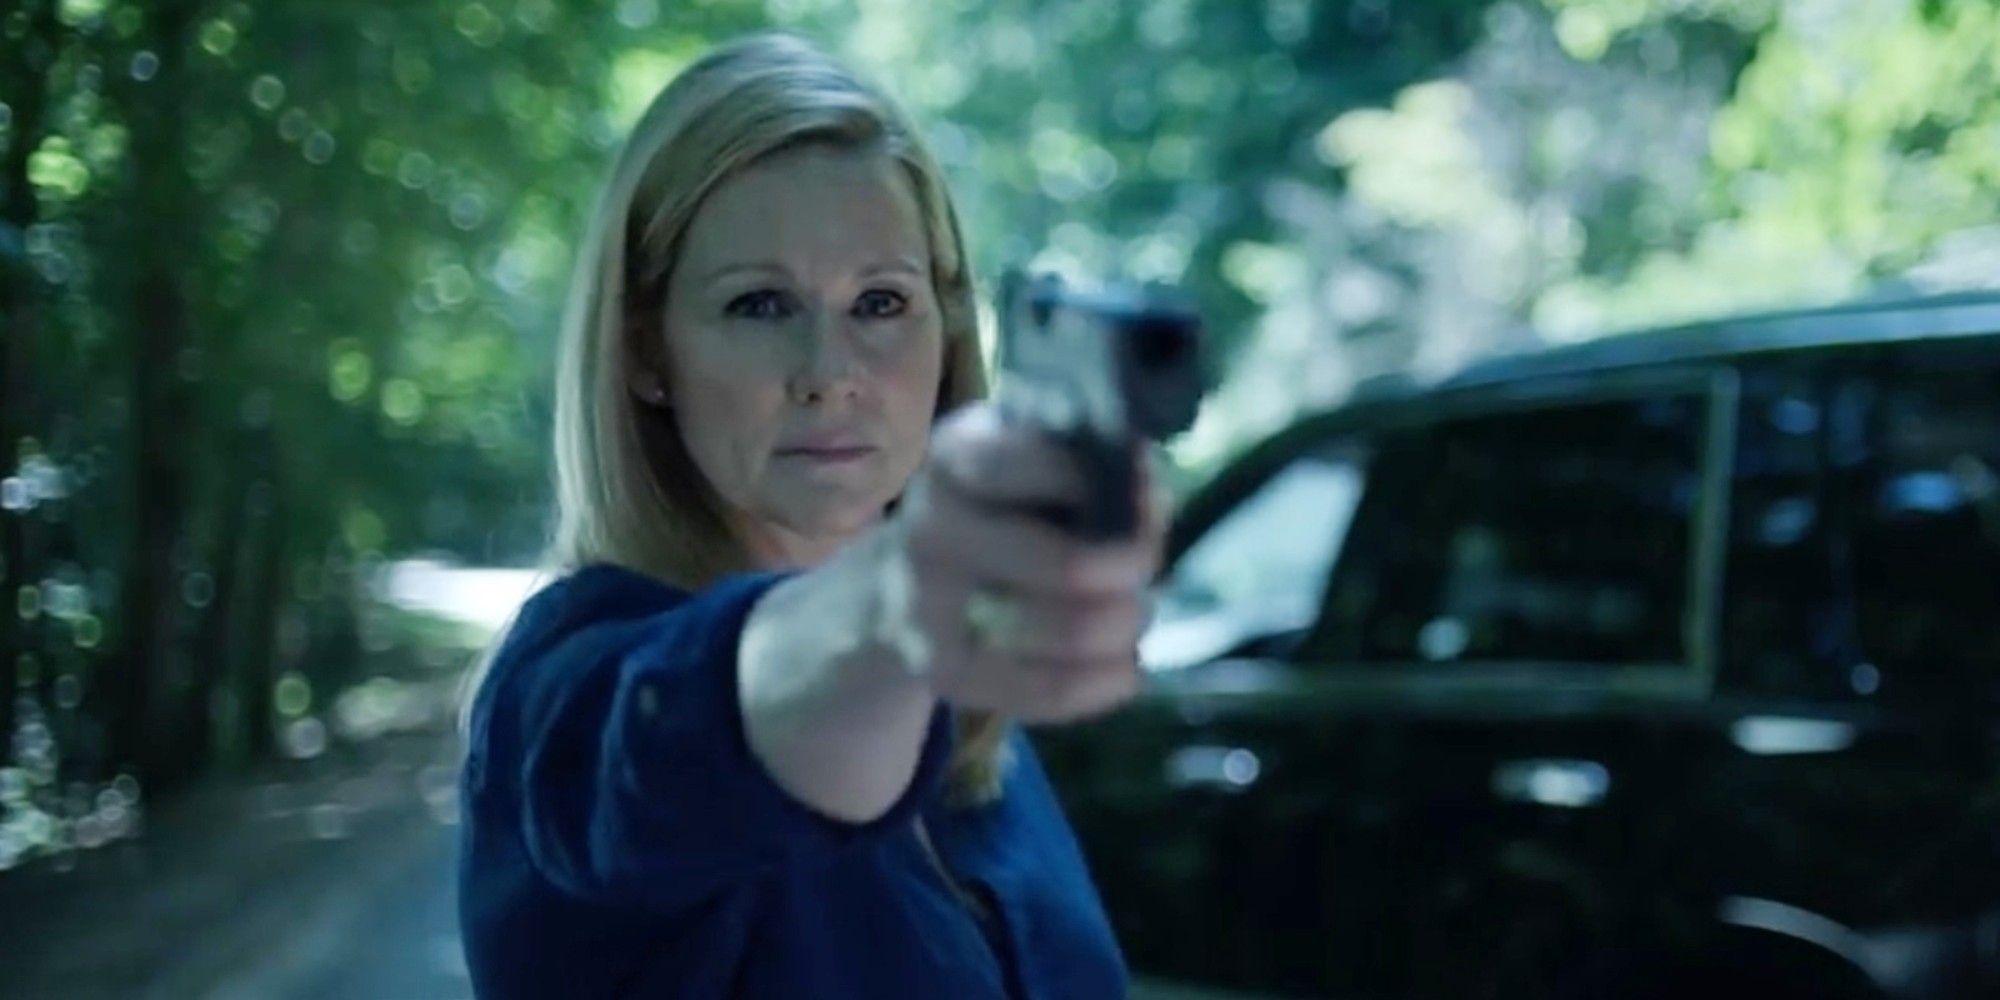 Wendy points a gun during a dream sequence in Ozark